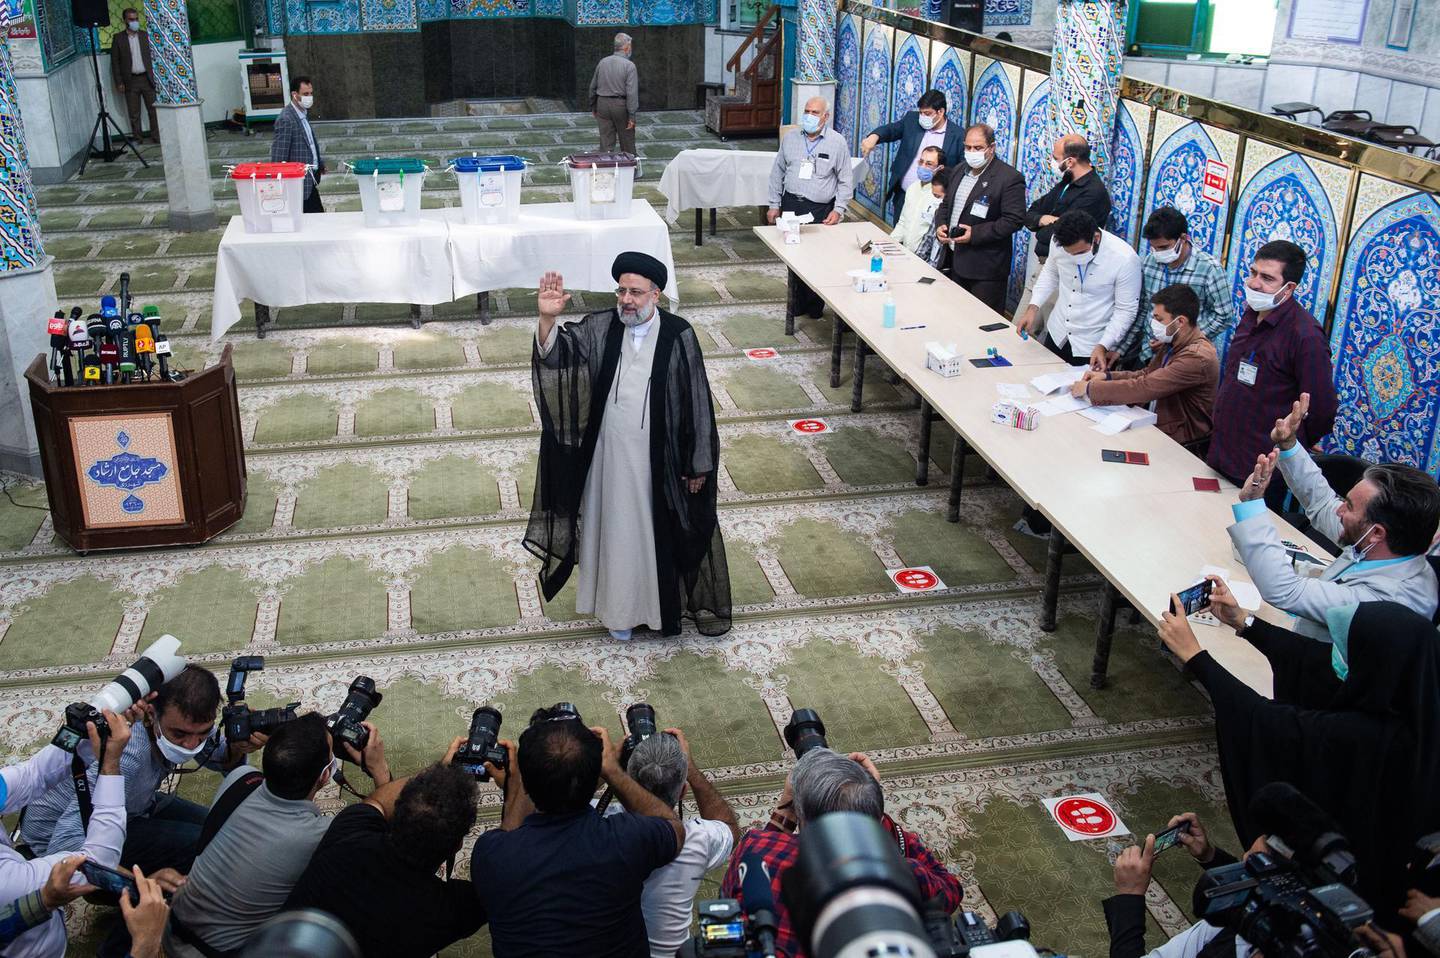 Ebrahim Raisi, judiciary chief, acknowledges the media after casting his vote in the Iranian presidential election in Tehran, Iran, on Friday, June 18, 2021. The stage-managed elevation of Raisi, 60, carries risks for the country’s guiding hand, Supreme Leader Ali Khamenei, given the ayatollah’s desire to quickly rid Iran of U.S. sanctions and a history of political unrest. Photographer: Ali Mohammadi/Bloomberg